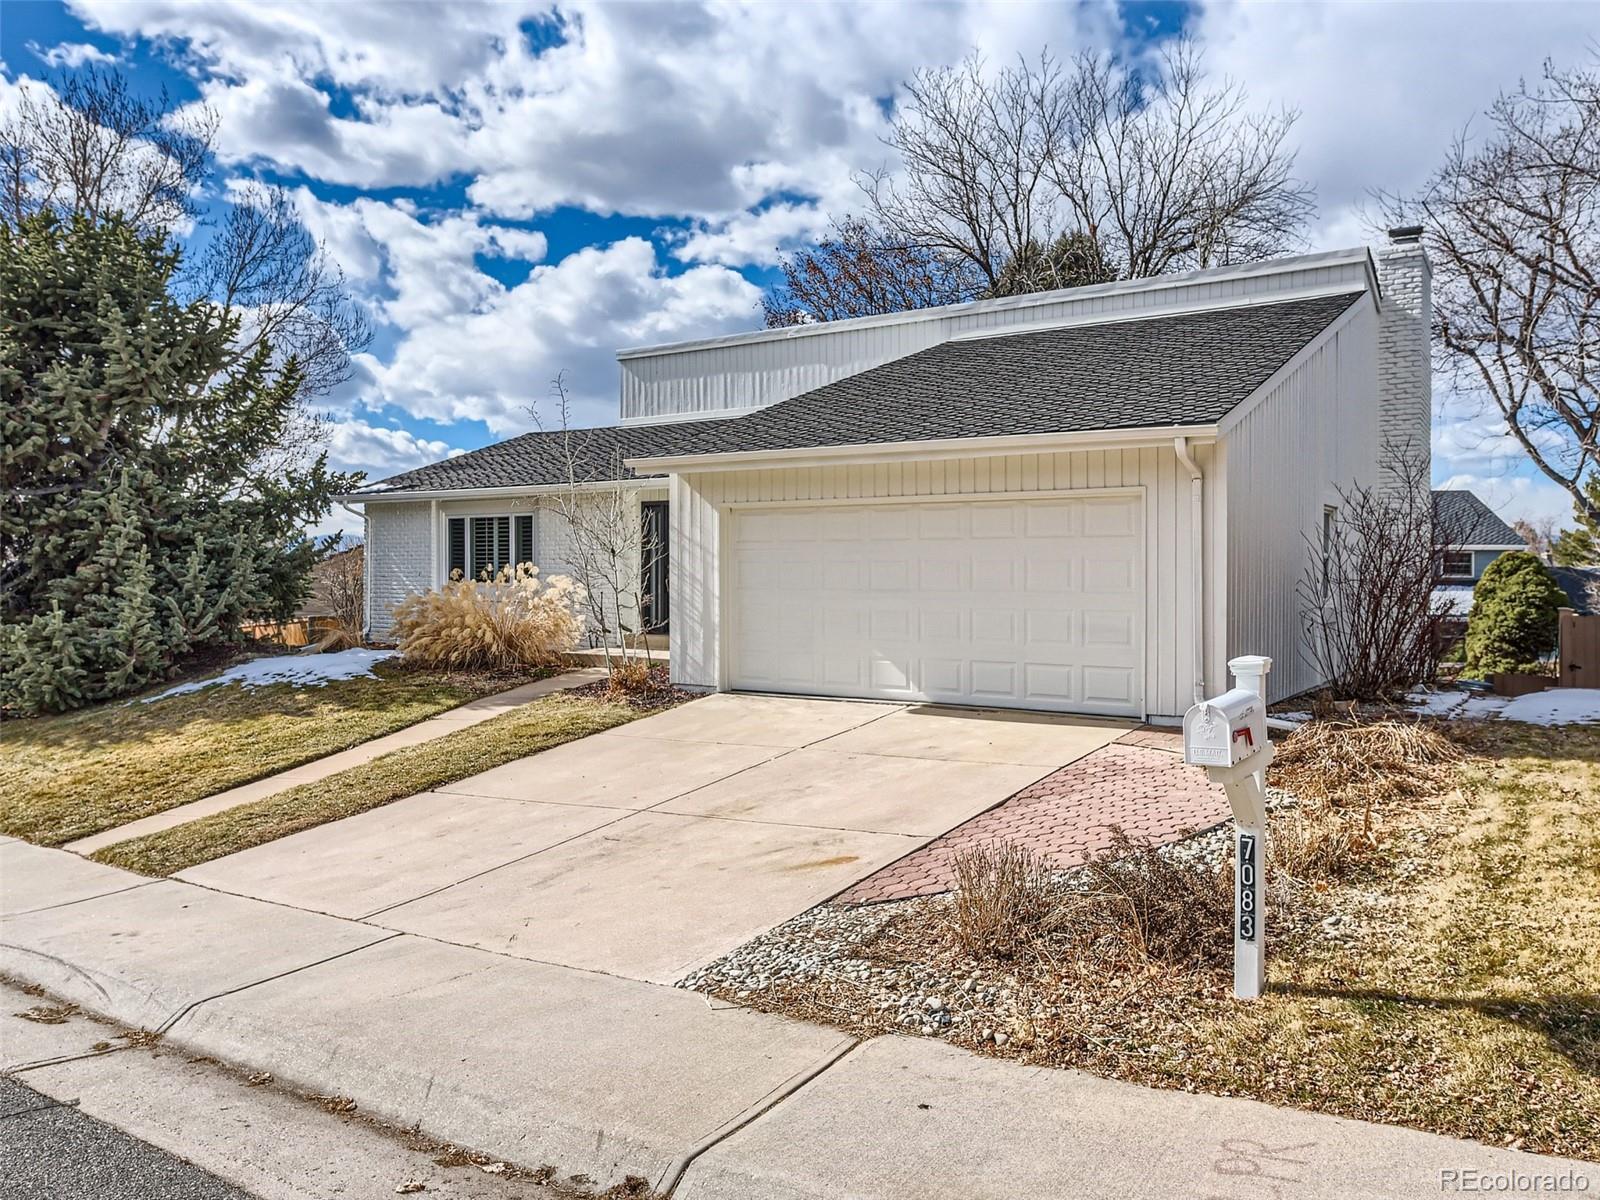 7083 s oneida circle, Centennial sold home. Closed on 2024-03-22 for $877,500.